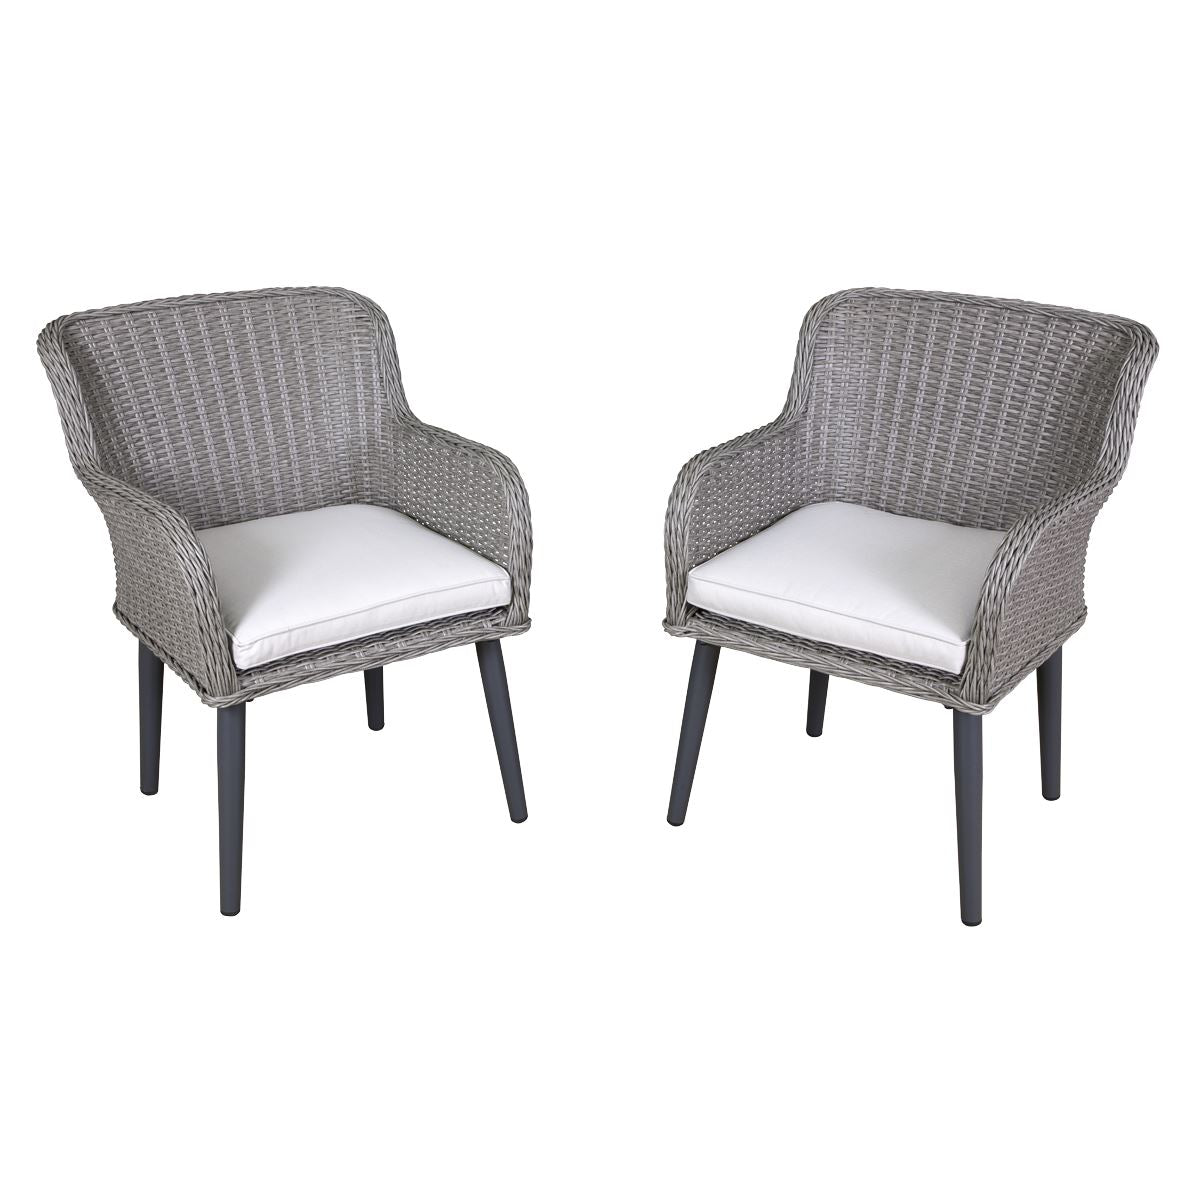 Dellonda Buxton Rattan Wicker Outdoor Dining Armchairs with Cushion, Set of 2, Grey